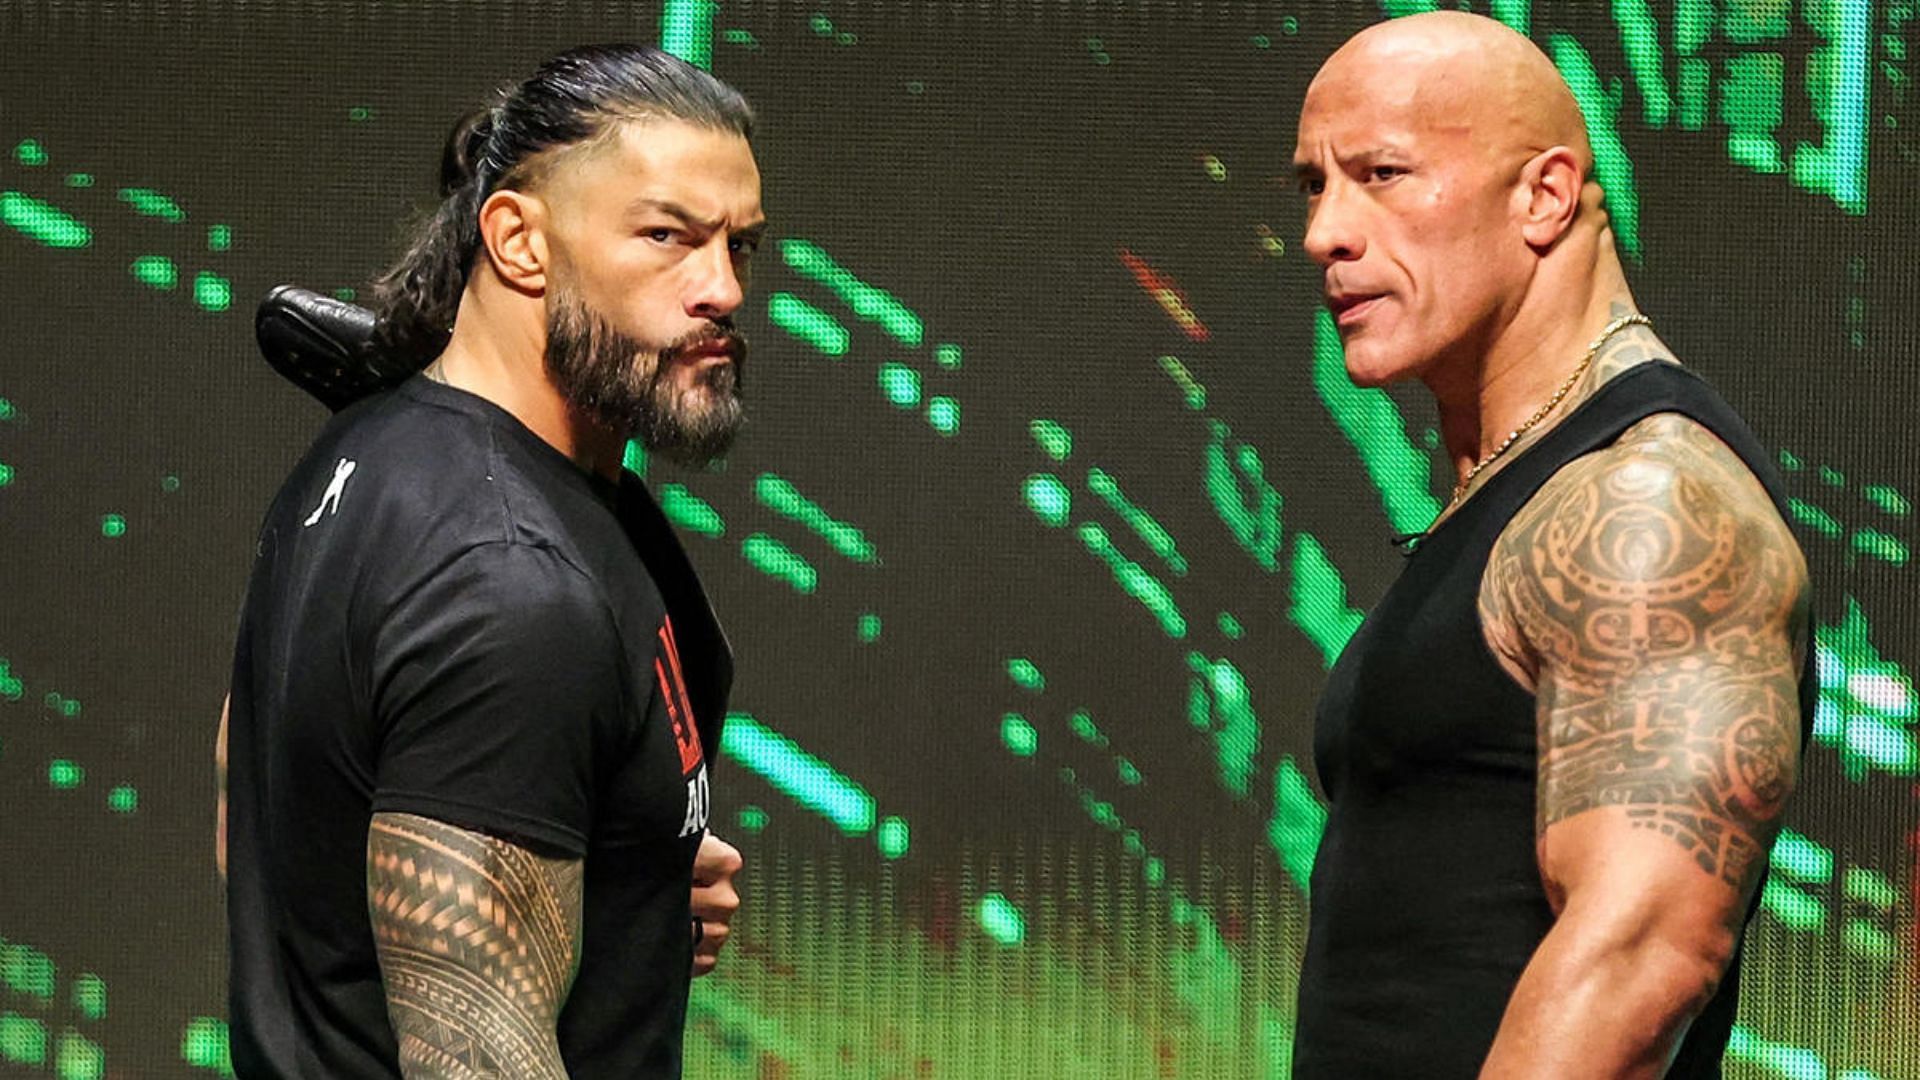 Roman Reigns and The Rock have formed a new alliance